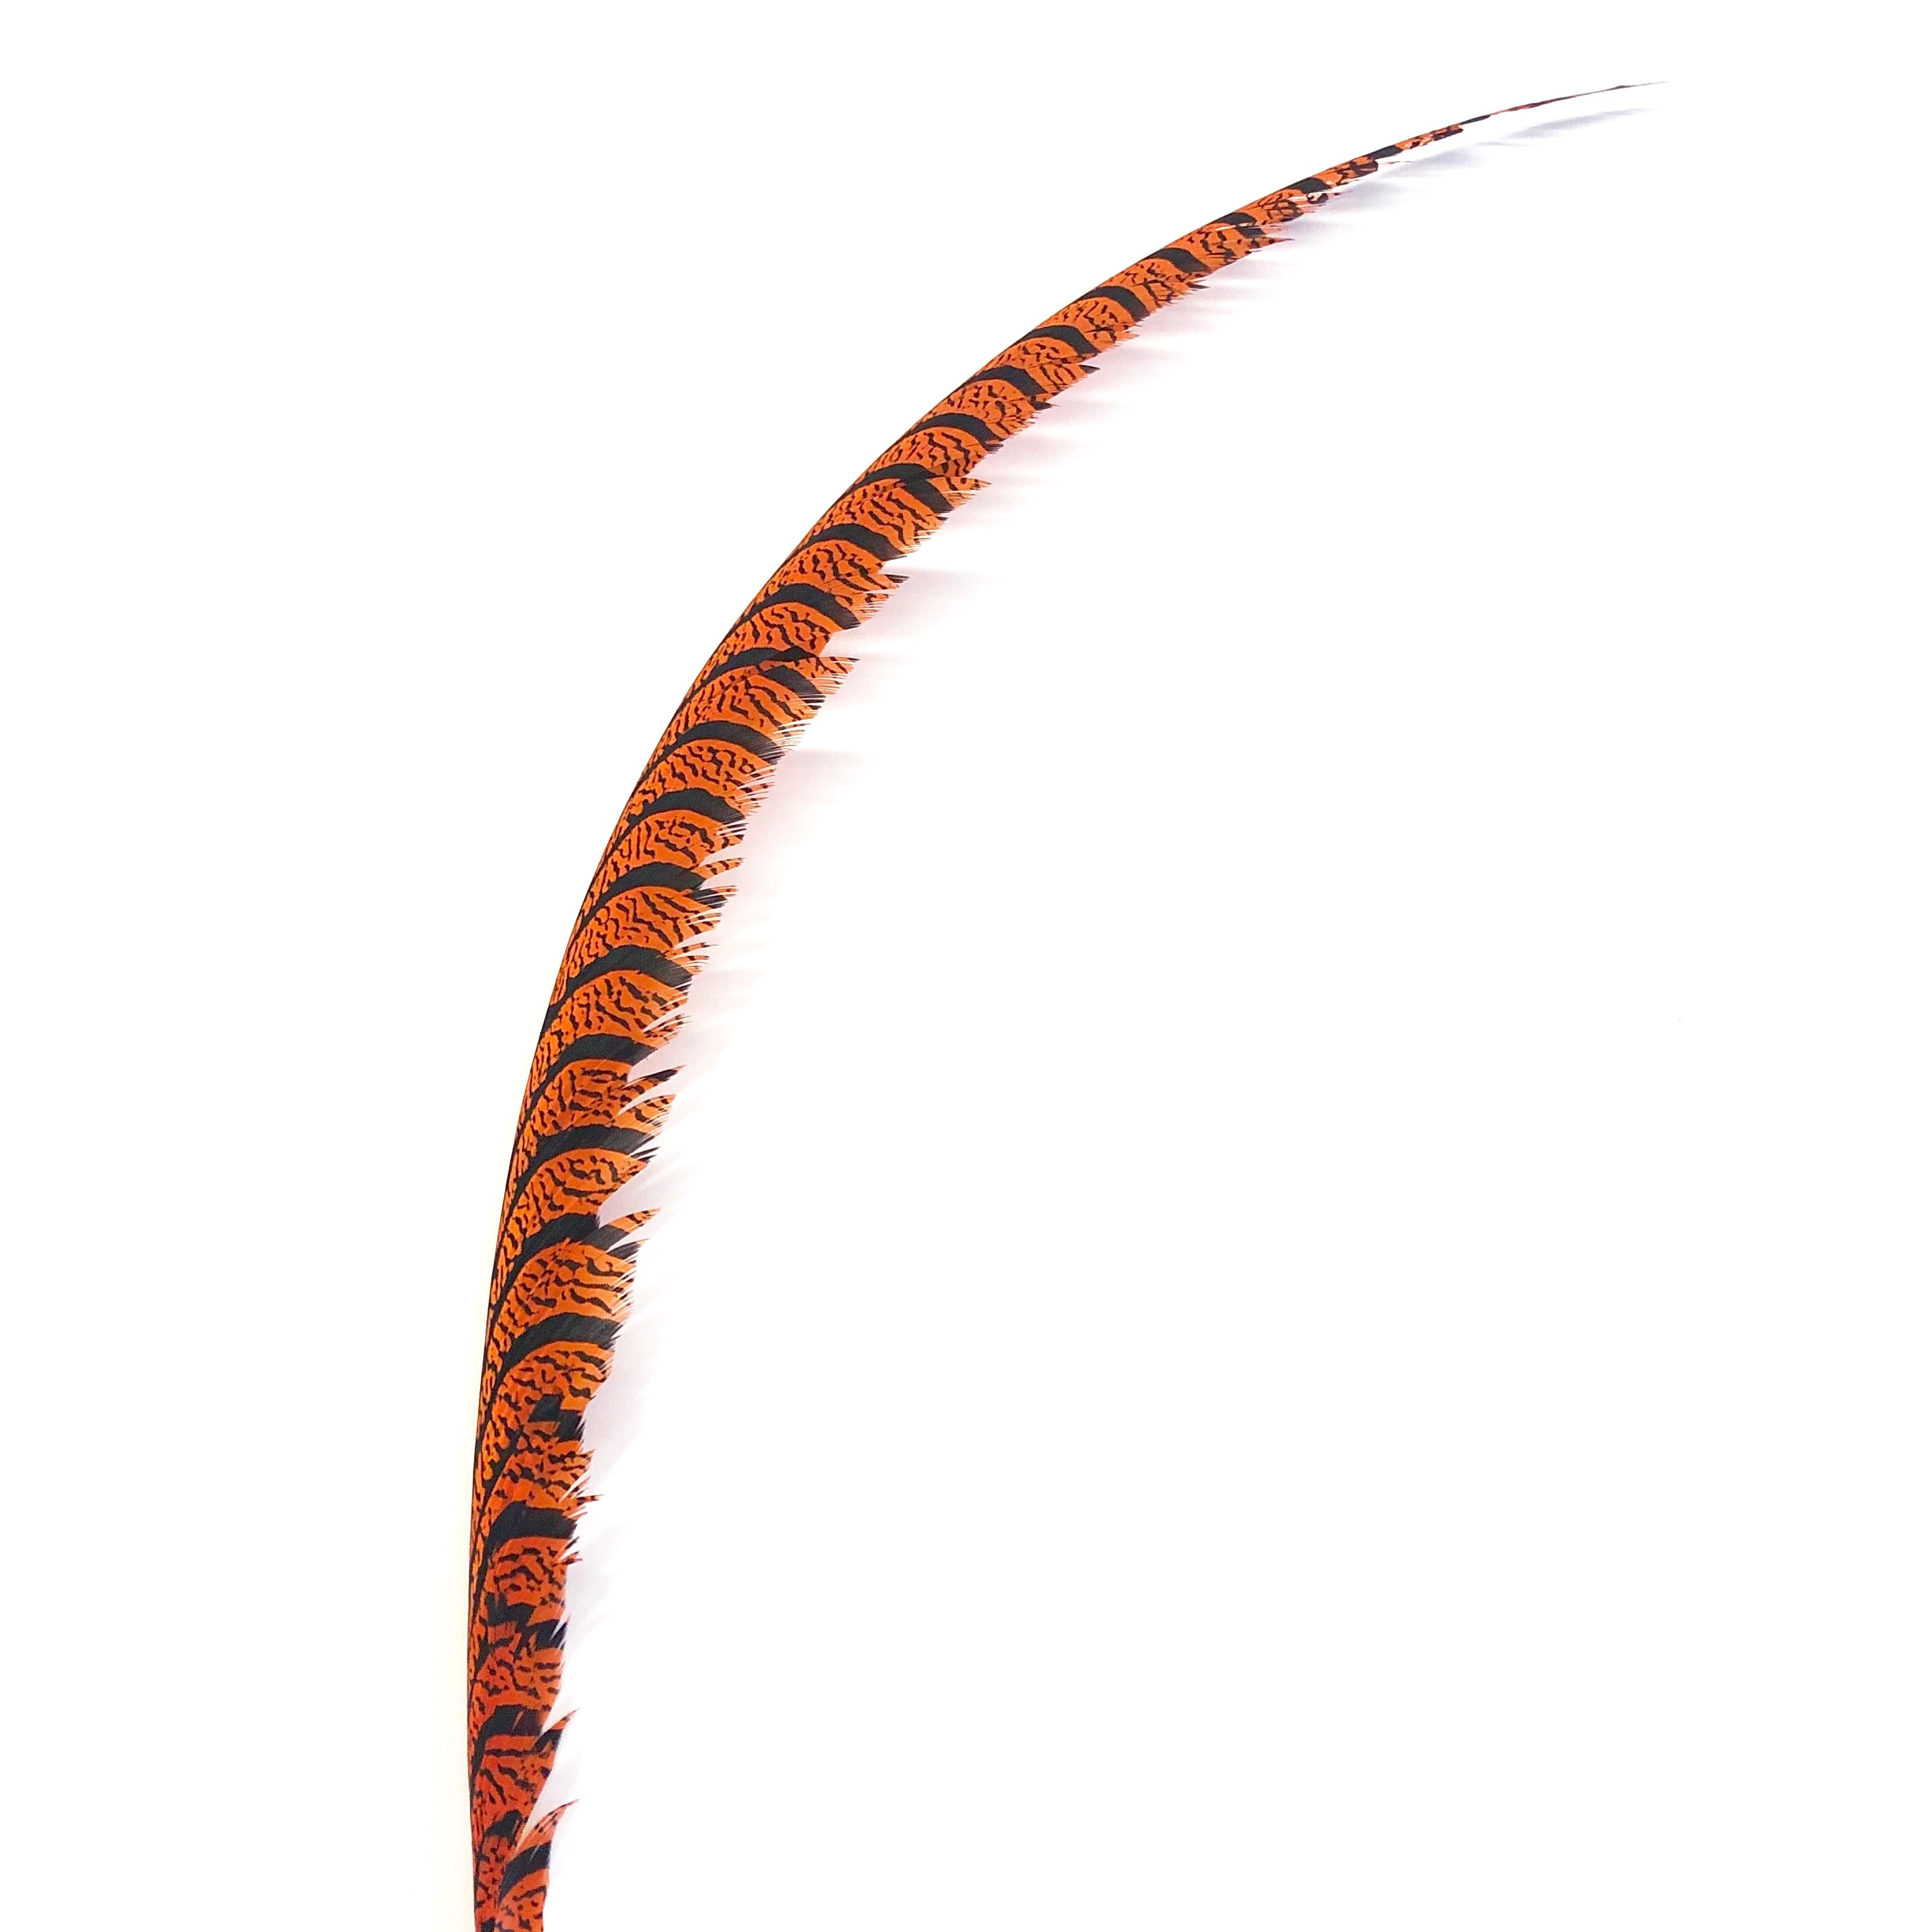 Lady Amherst Pheasant Centre Tail Feather - Orange